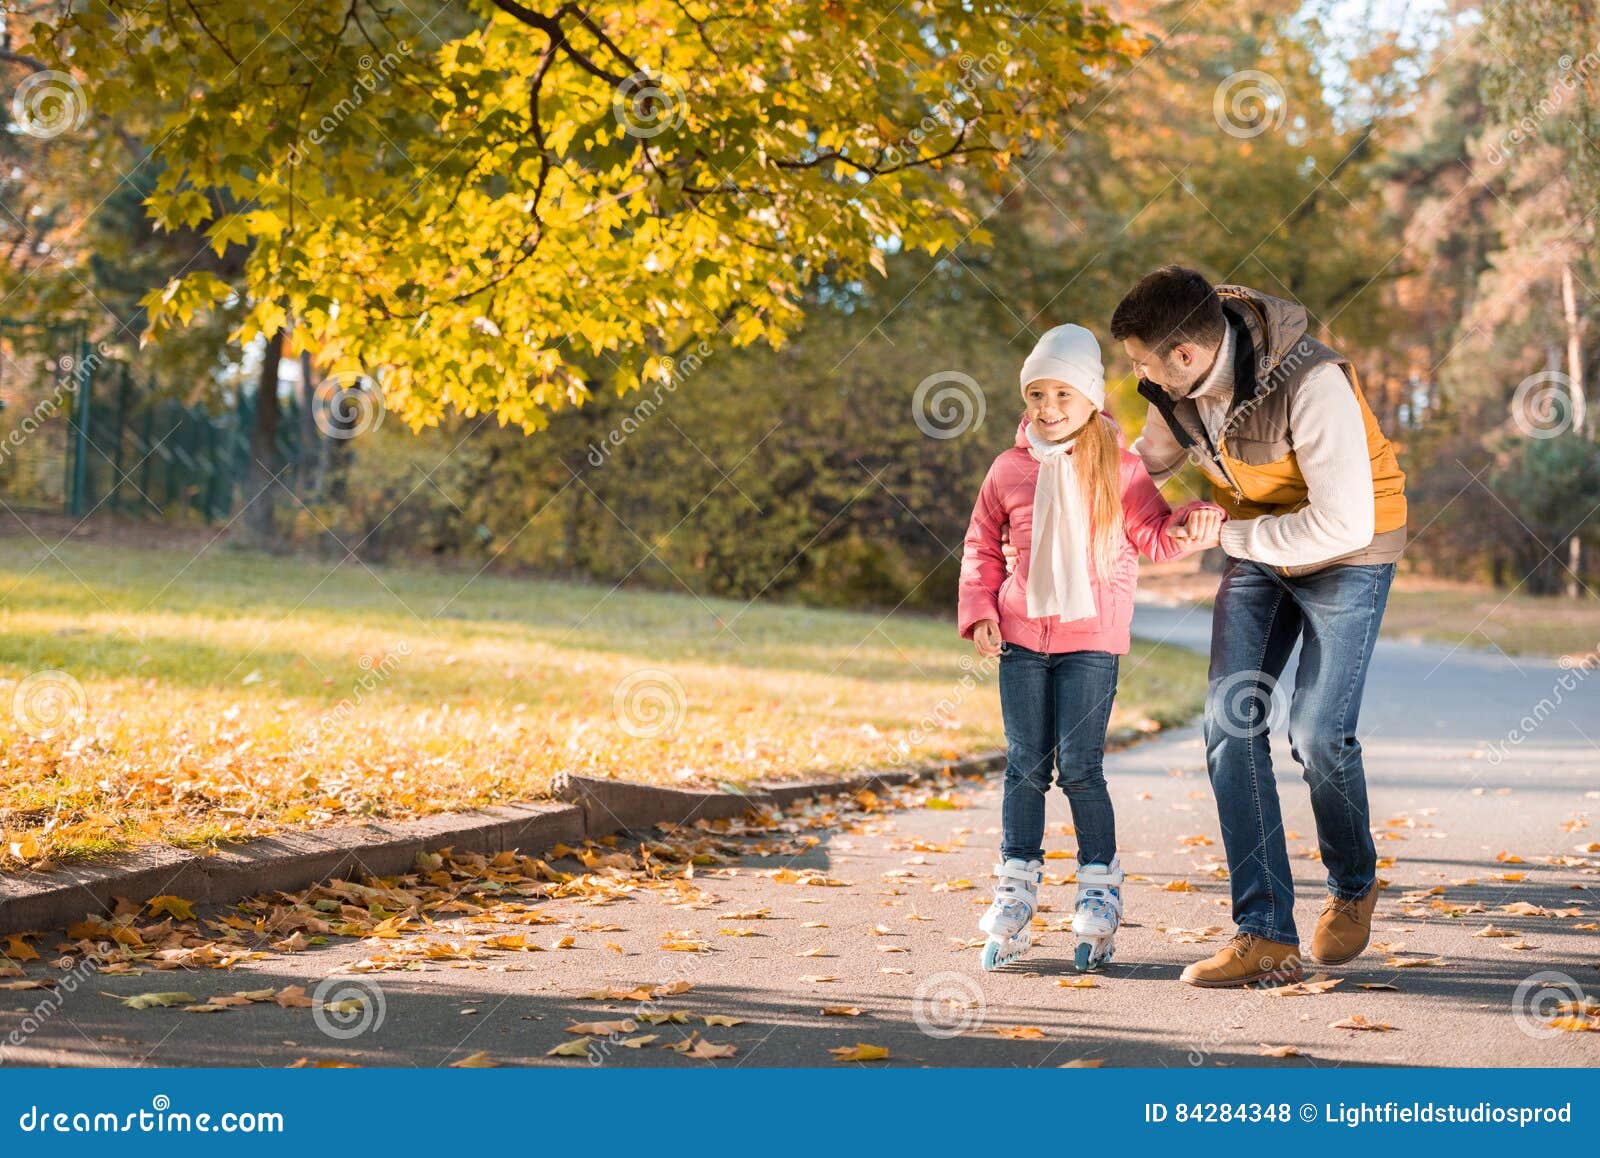 Father Teaching Daughter To Roller Skating Stock Photo - Image of park ...